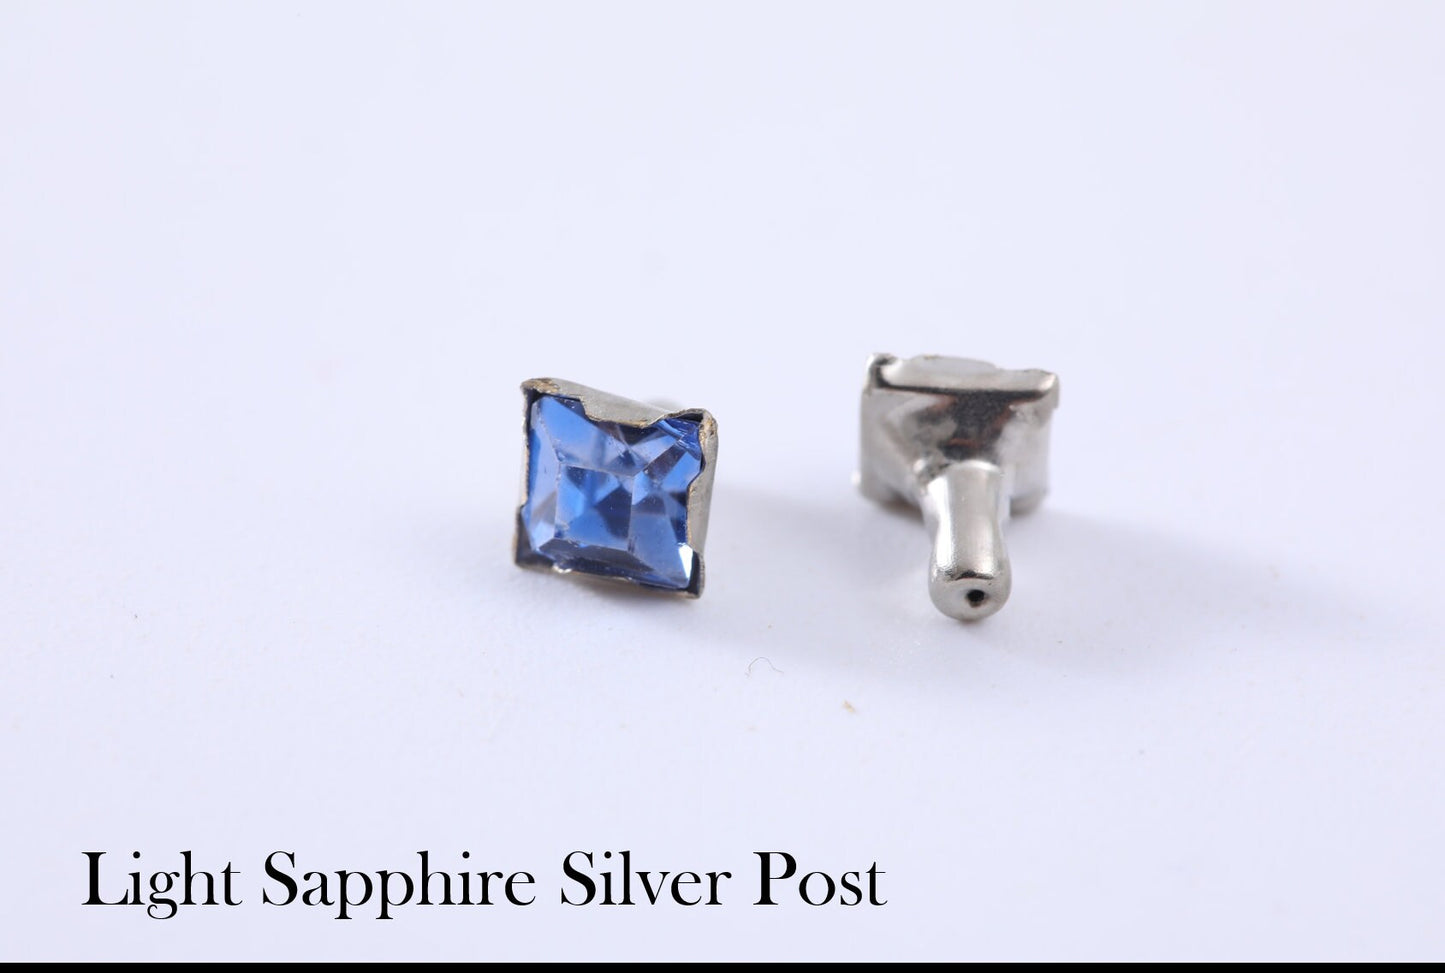 Square Crystal Rivets